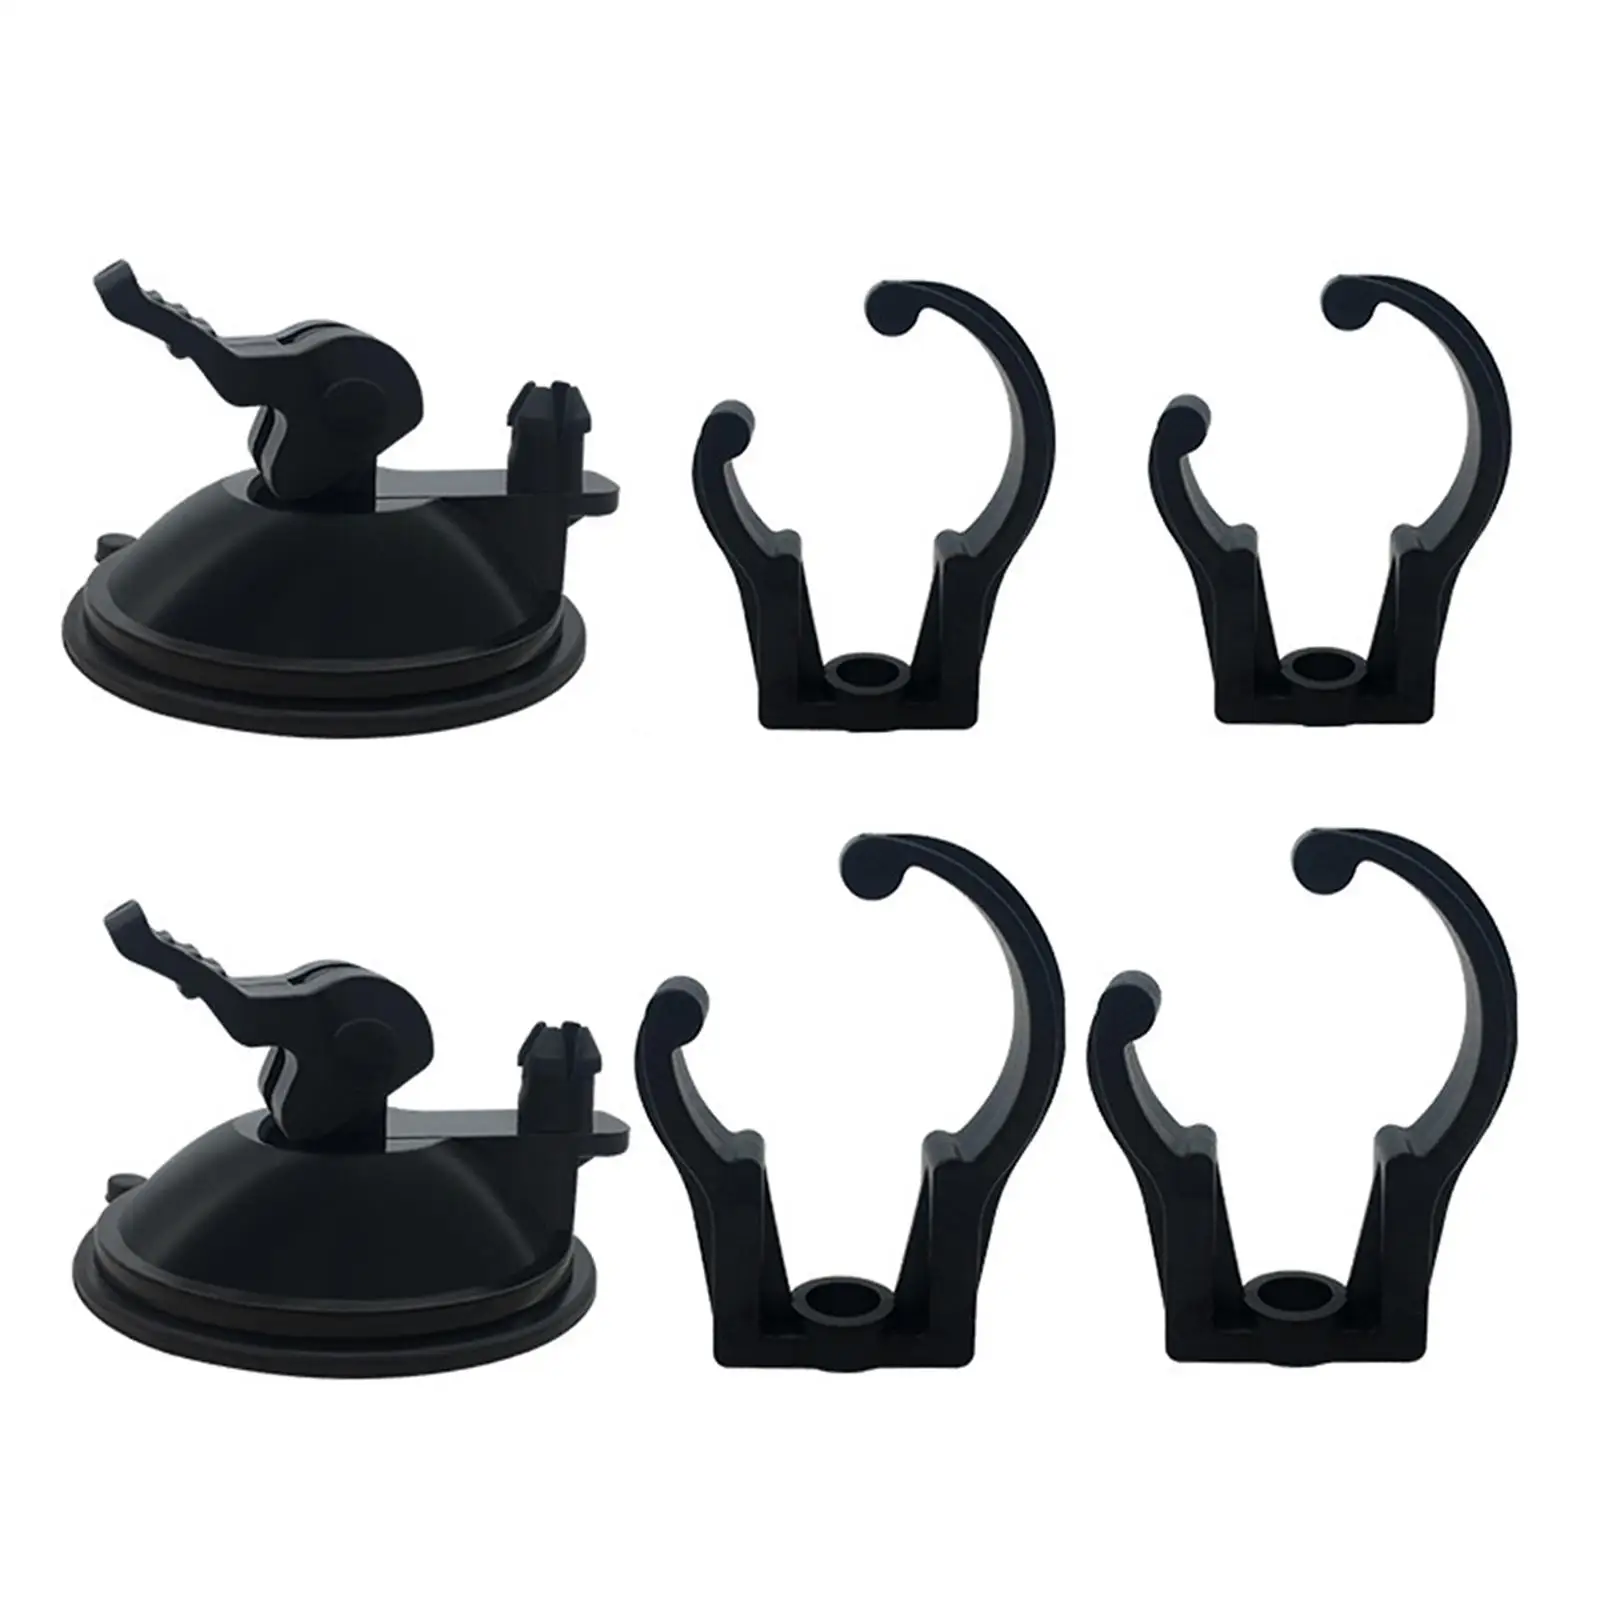 Aquarium Heater Suction Cups Clips for Fish Tank Tubing Airline Tube Clamps Fish Tank Heating Rod Suction Clip Water Pipes